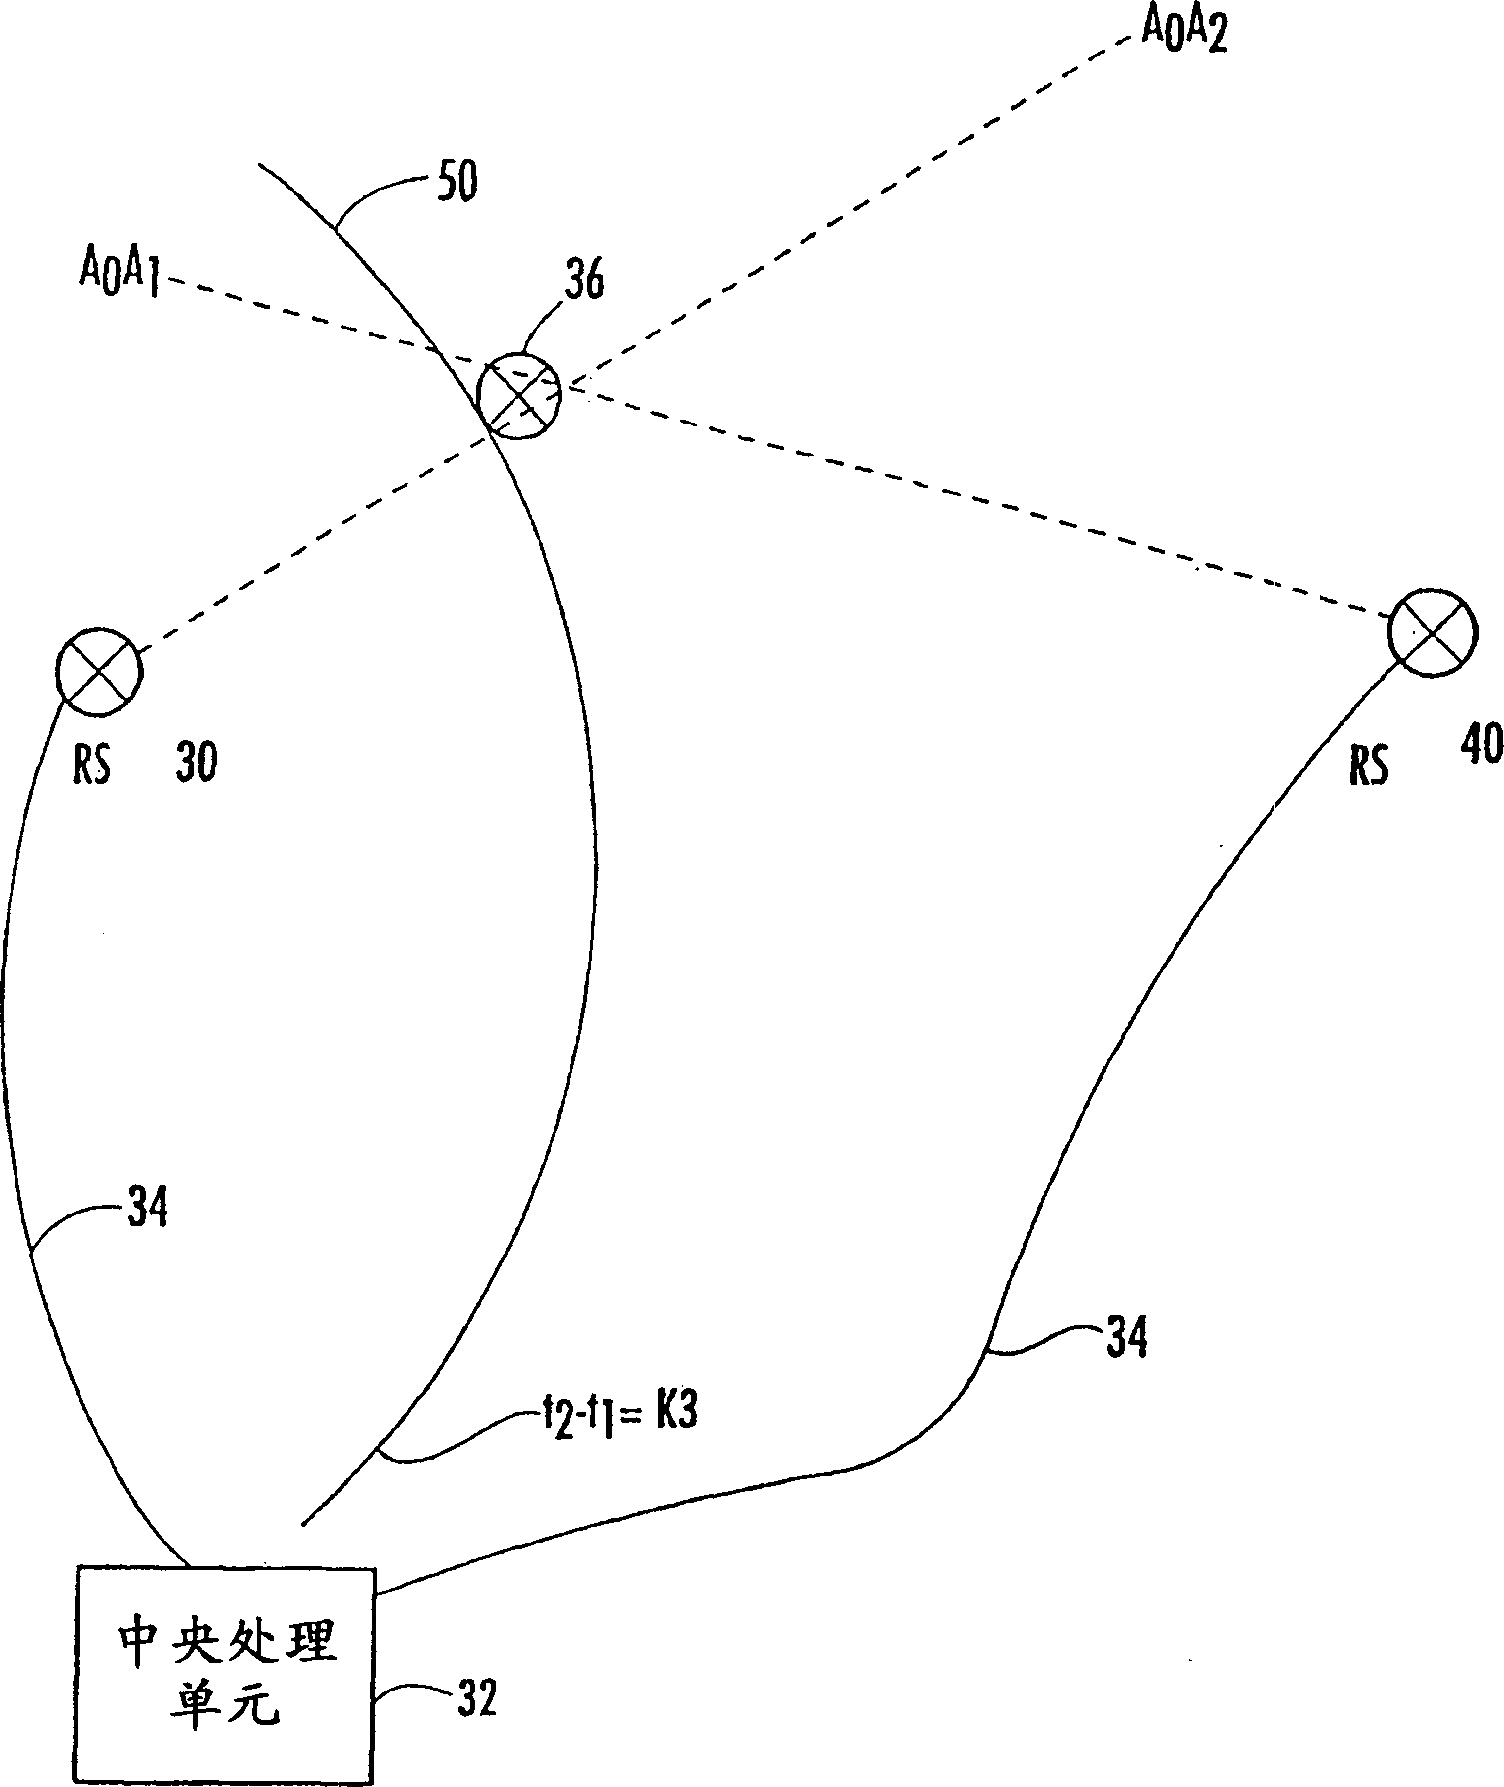 Method and system for calibrating wireless location system